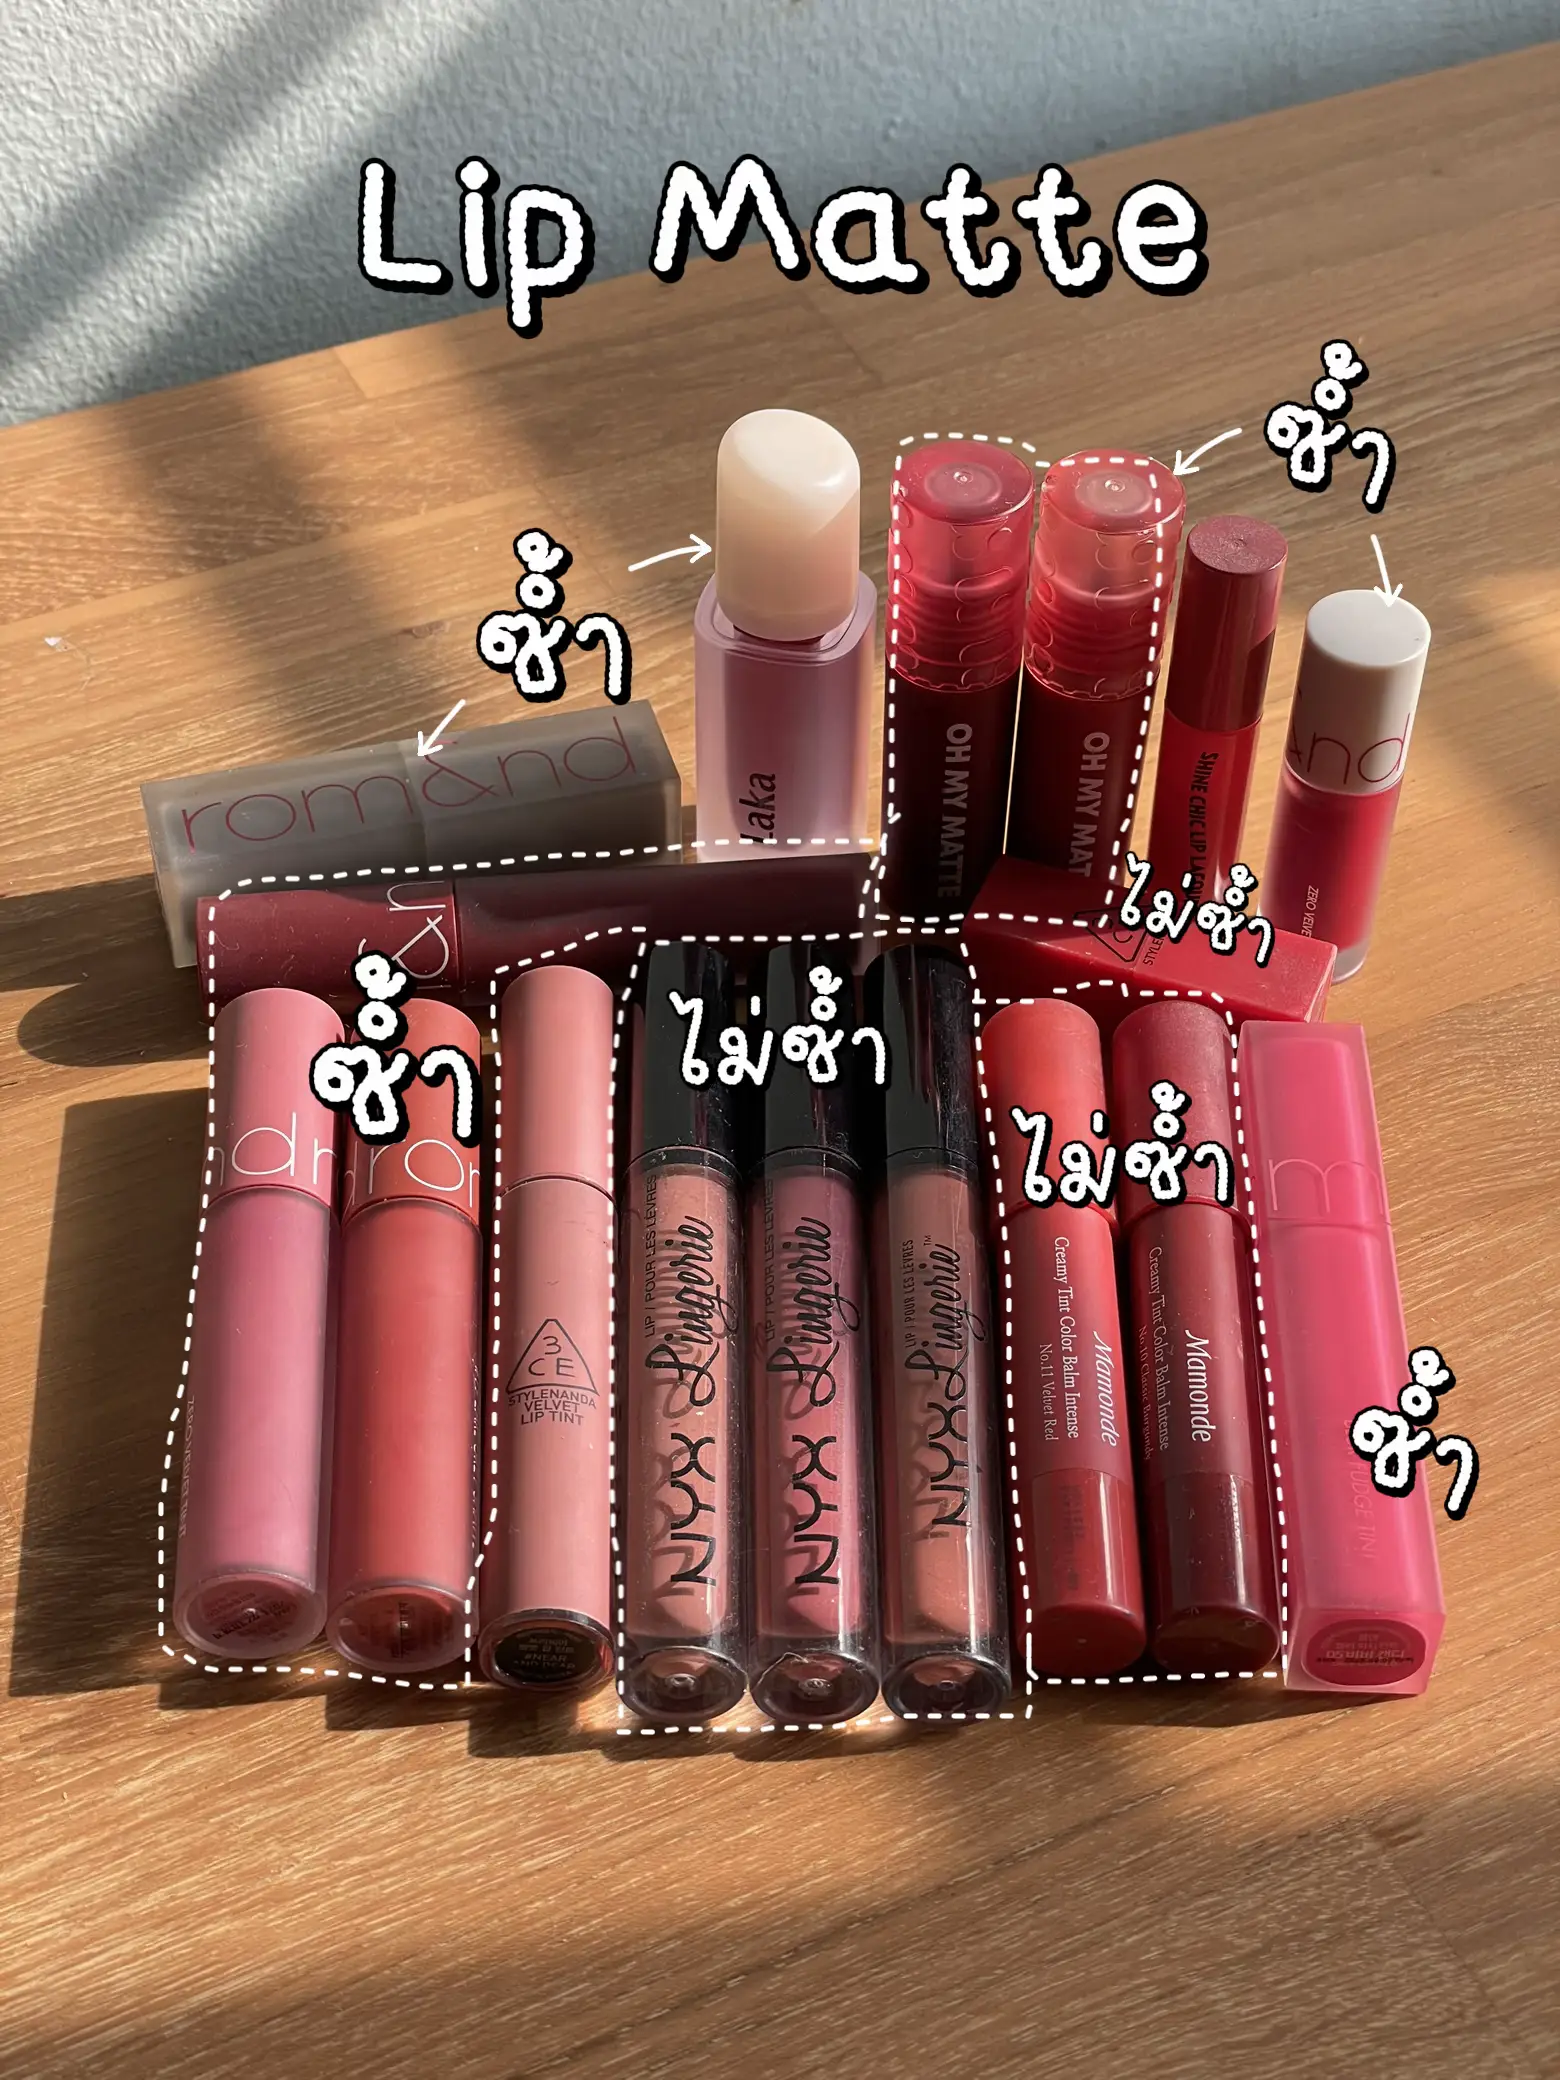 Open Lip Rom & nd with All Models, All Colors!💋💄, Gallery posted by  LaMeow💖👀